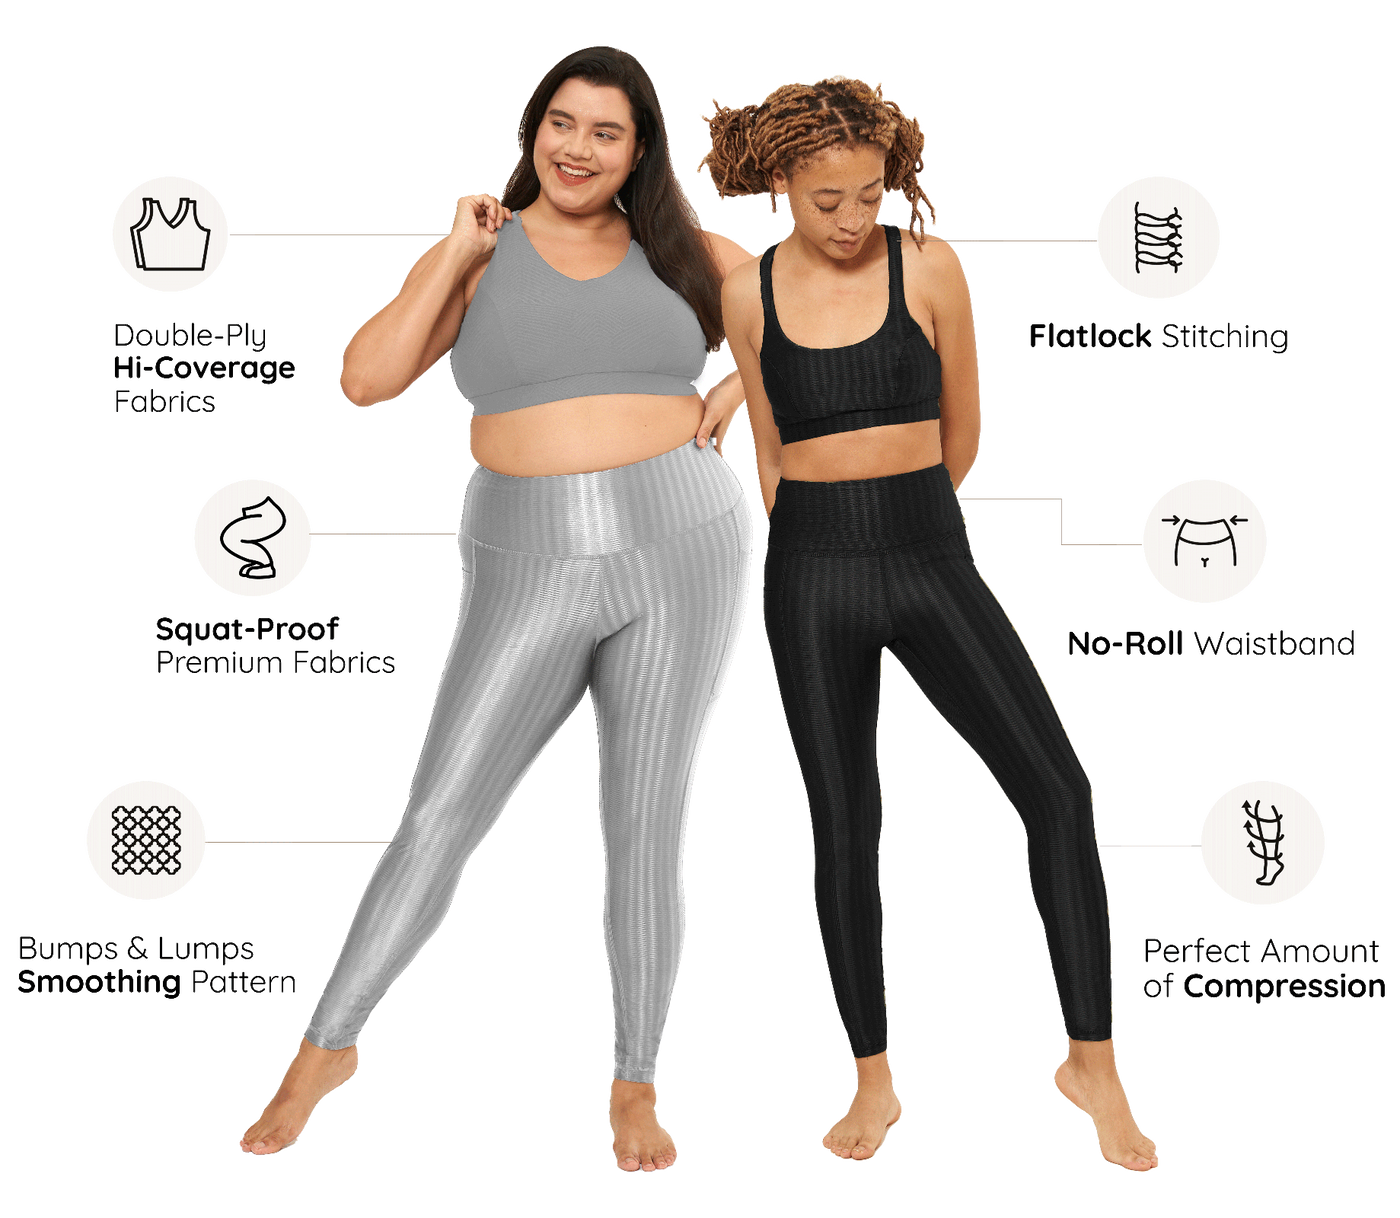 Lola Getts - You asked and we listened. We've made our All In One Tank with  a shelf bra and just enough compression to flatter your curves while still  being comfortable. It